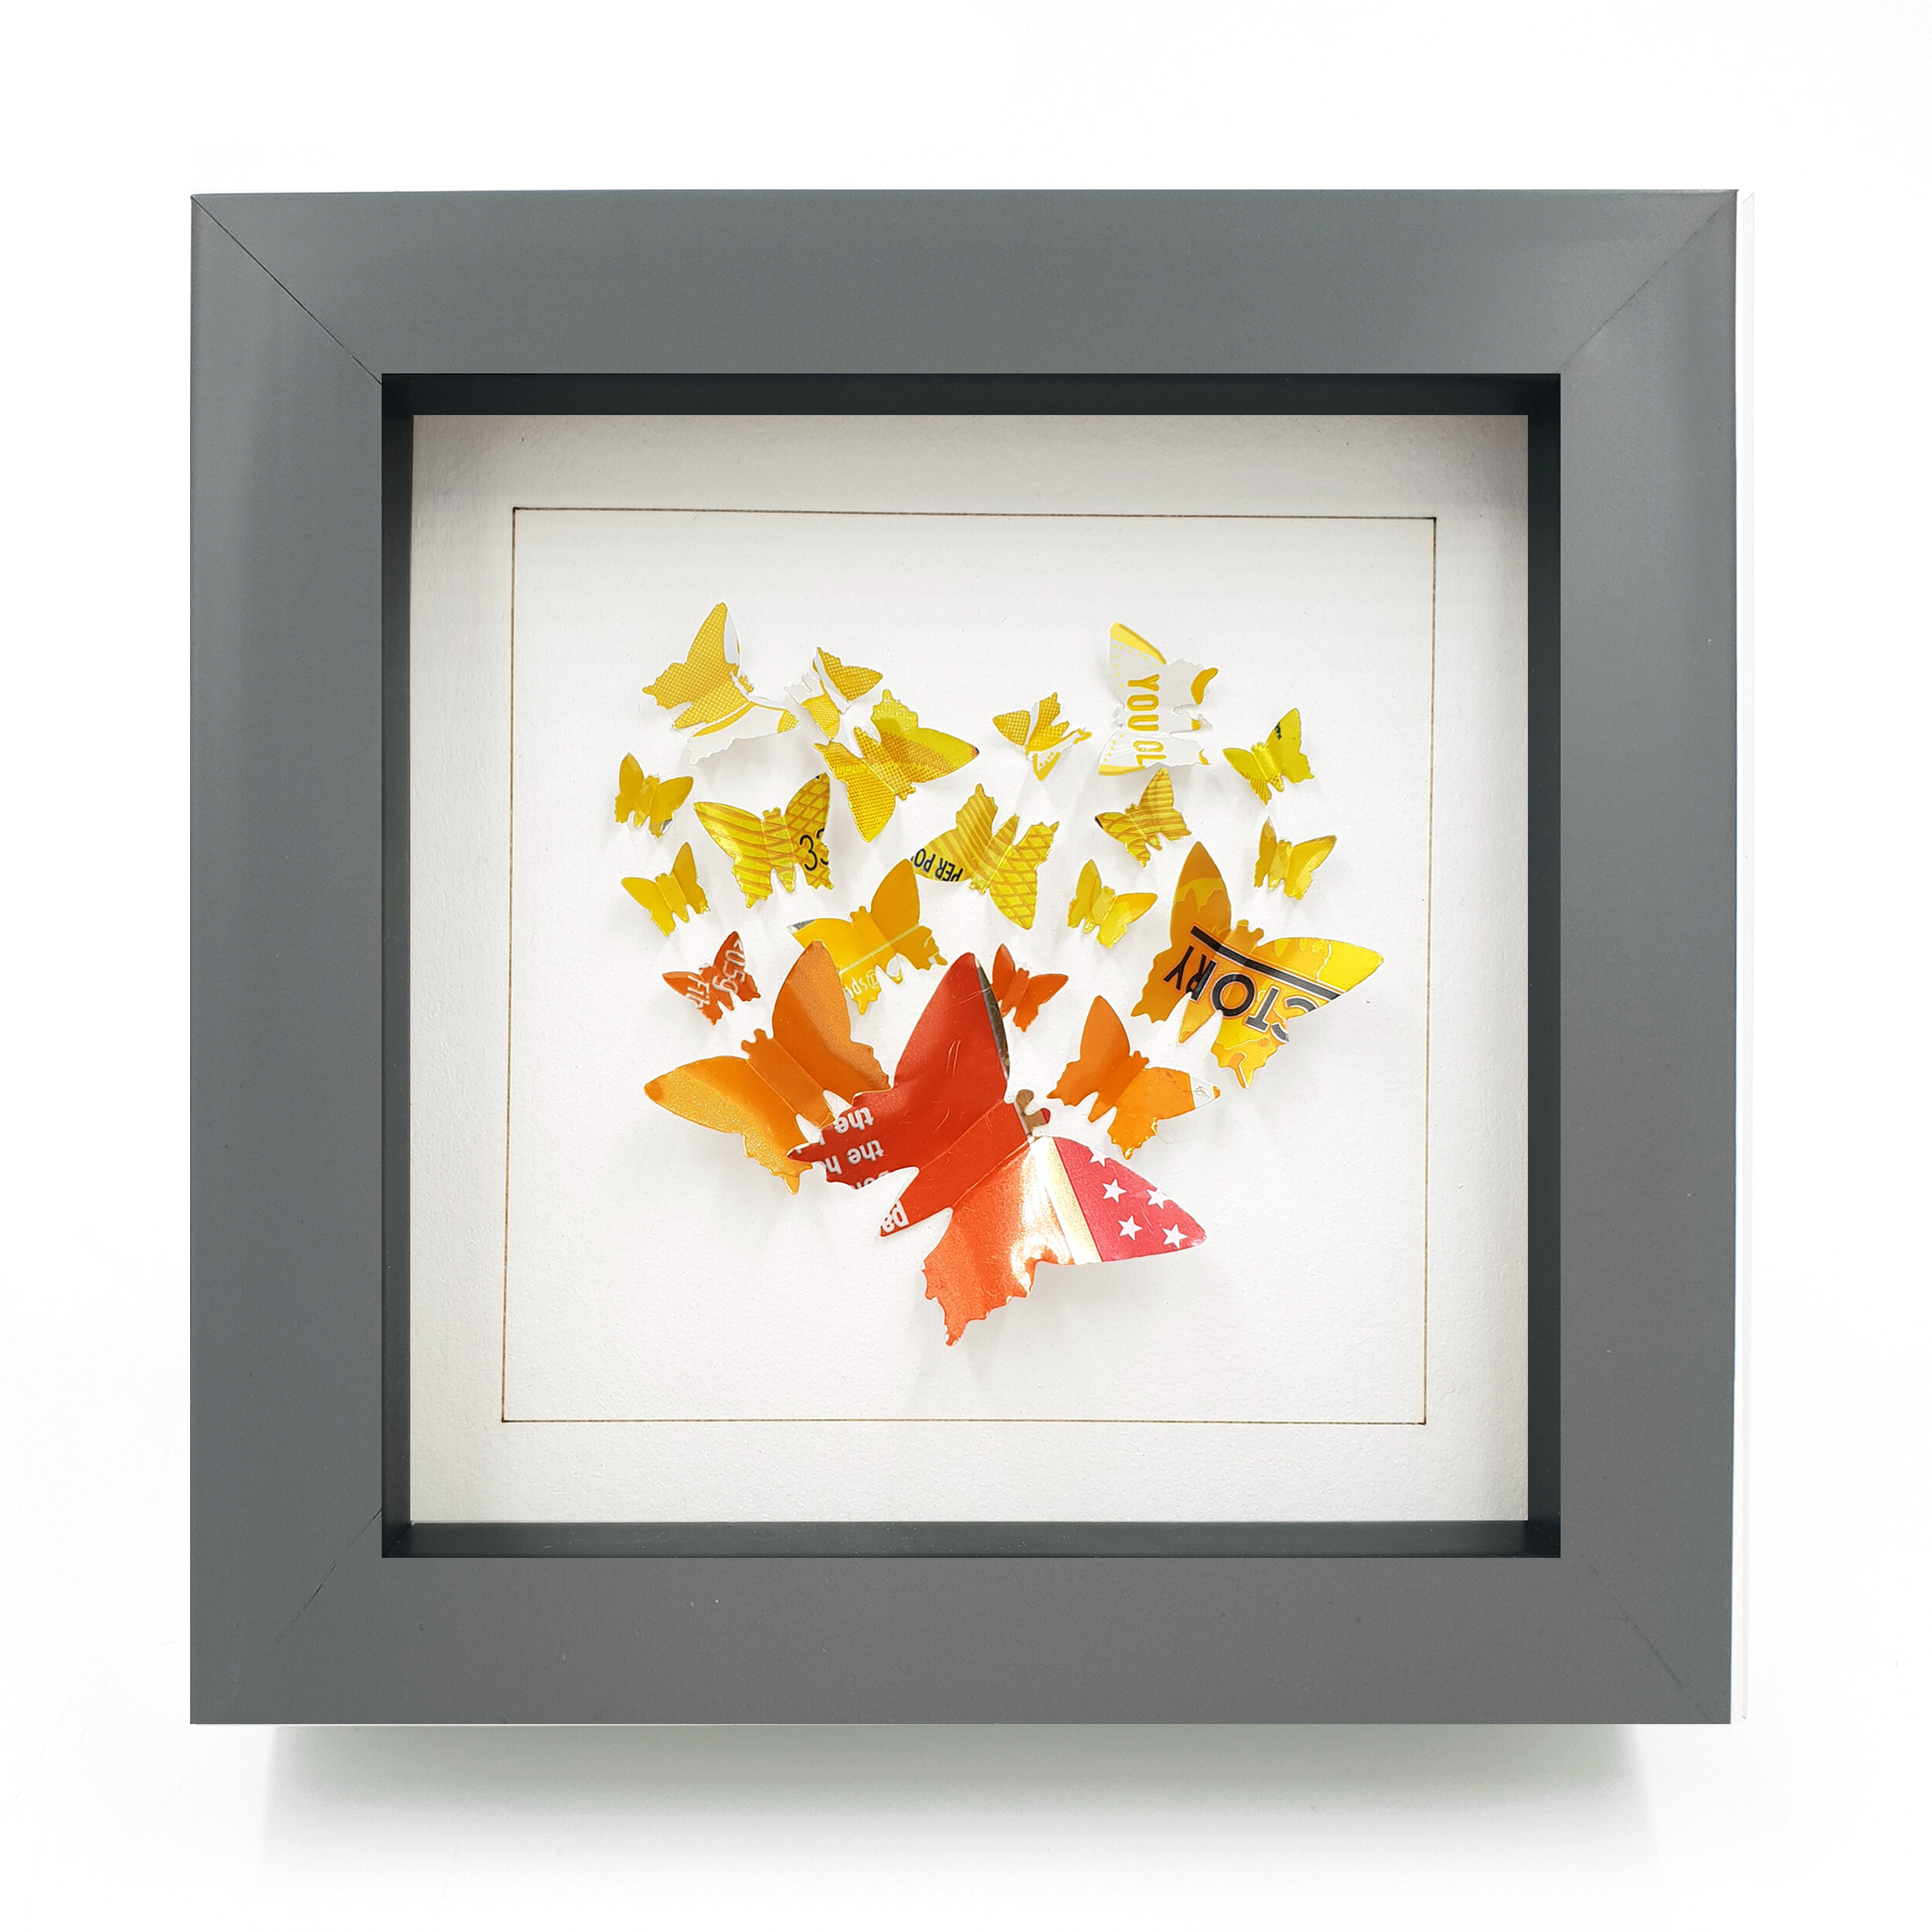 Orange and yellow butterfly heart hand made wall art present grey frame